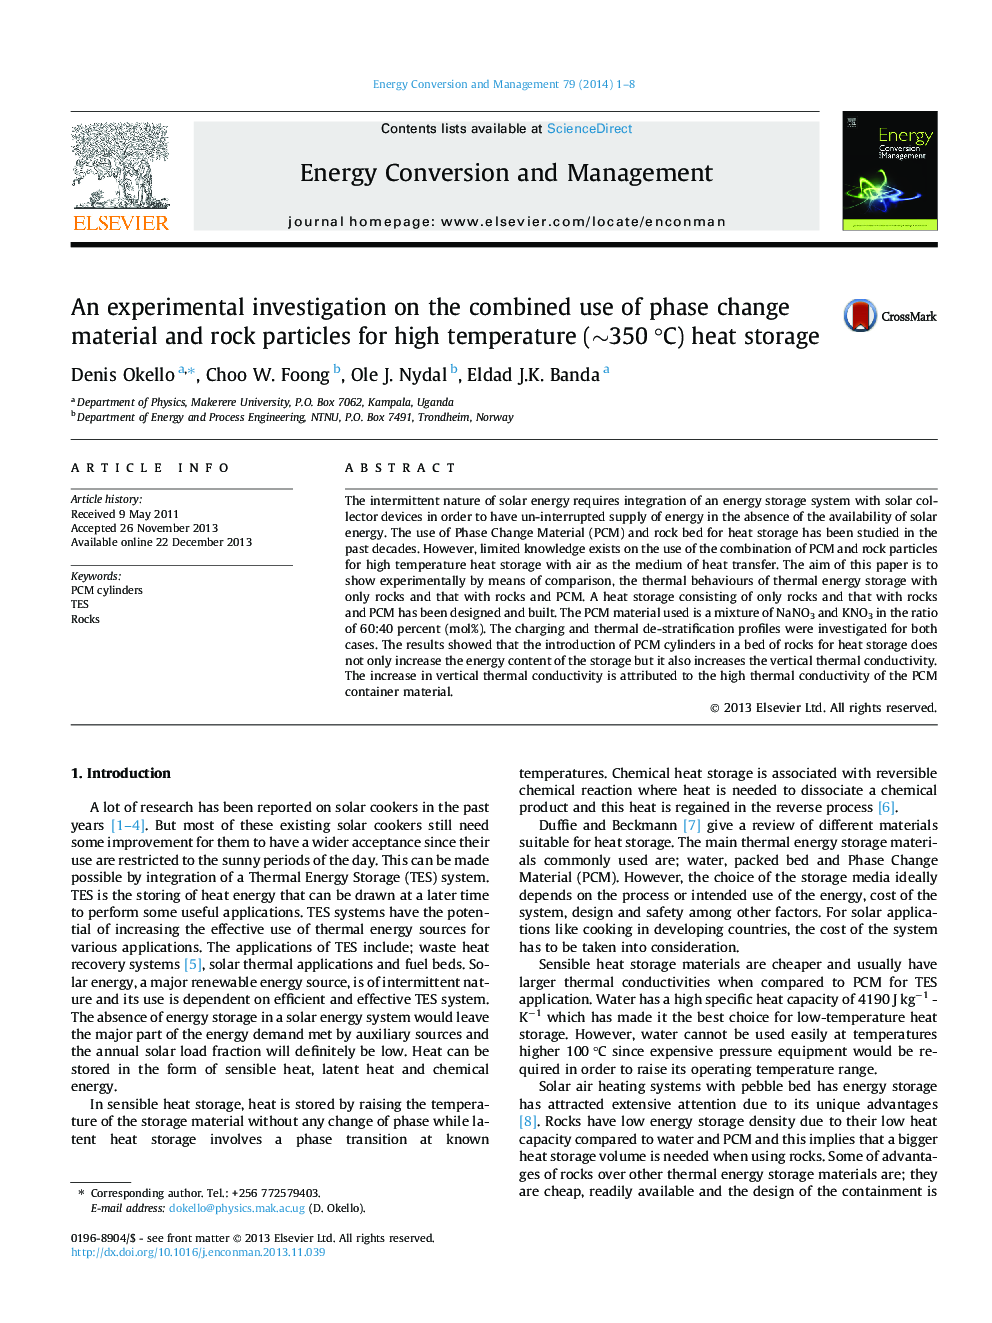 An experimental investigation on the combined use of phase change material and rock particles for high temperature (∼350 °C) heat storage